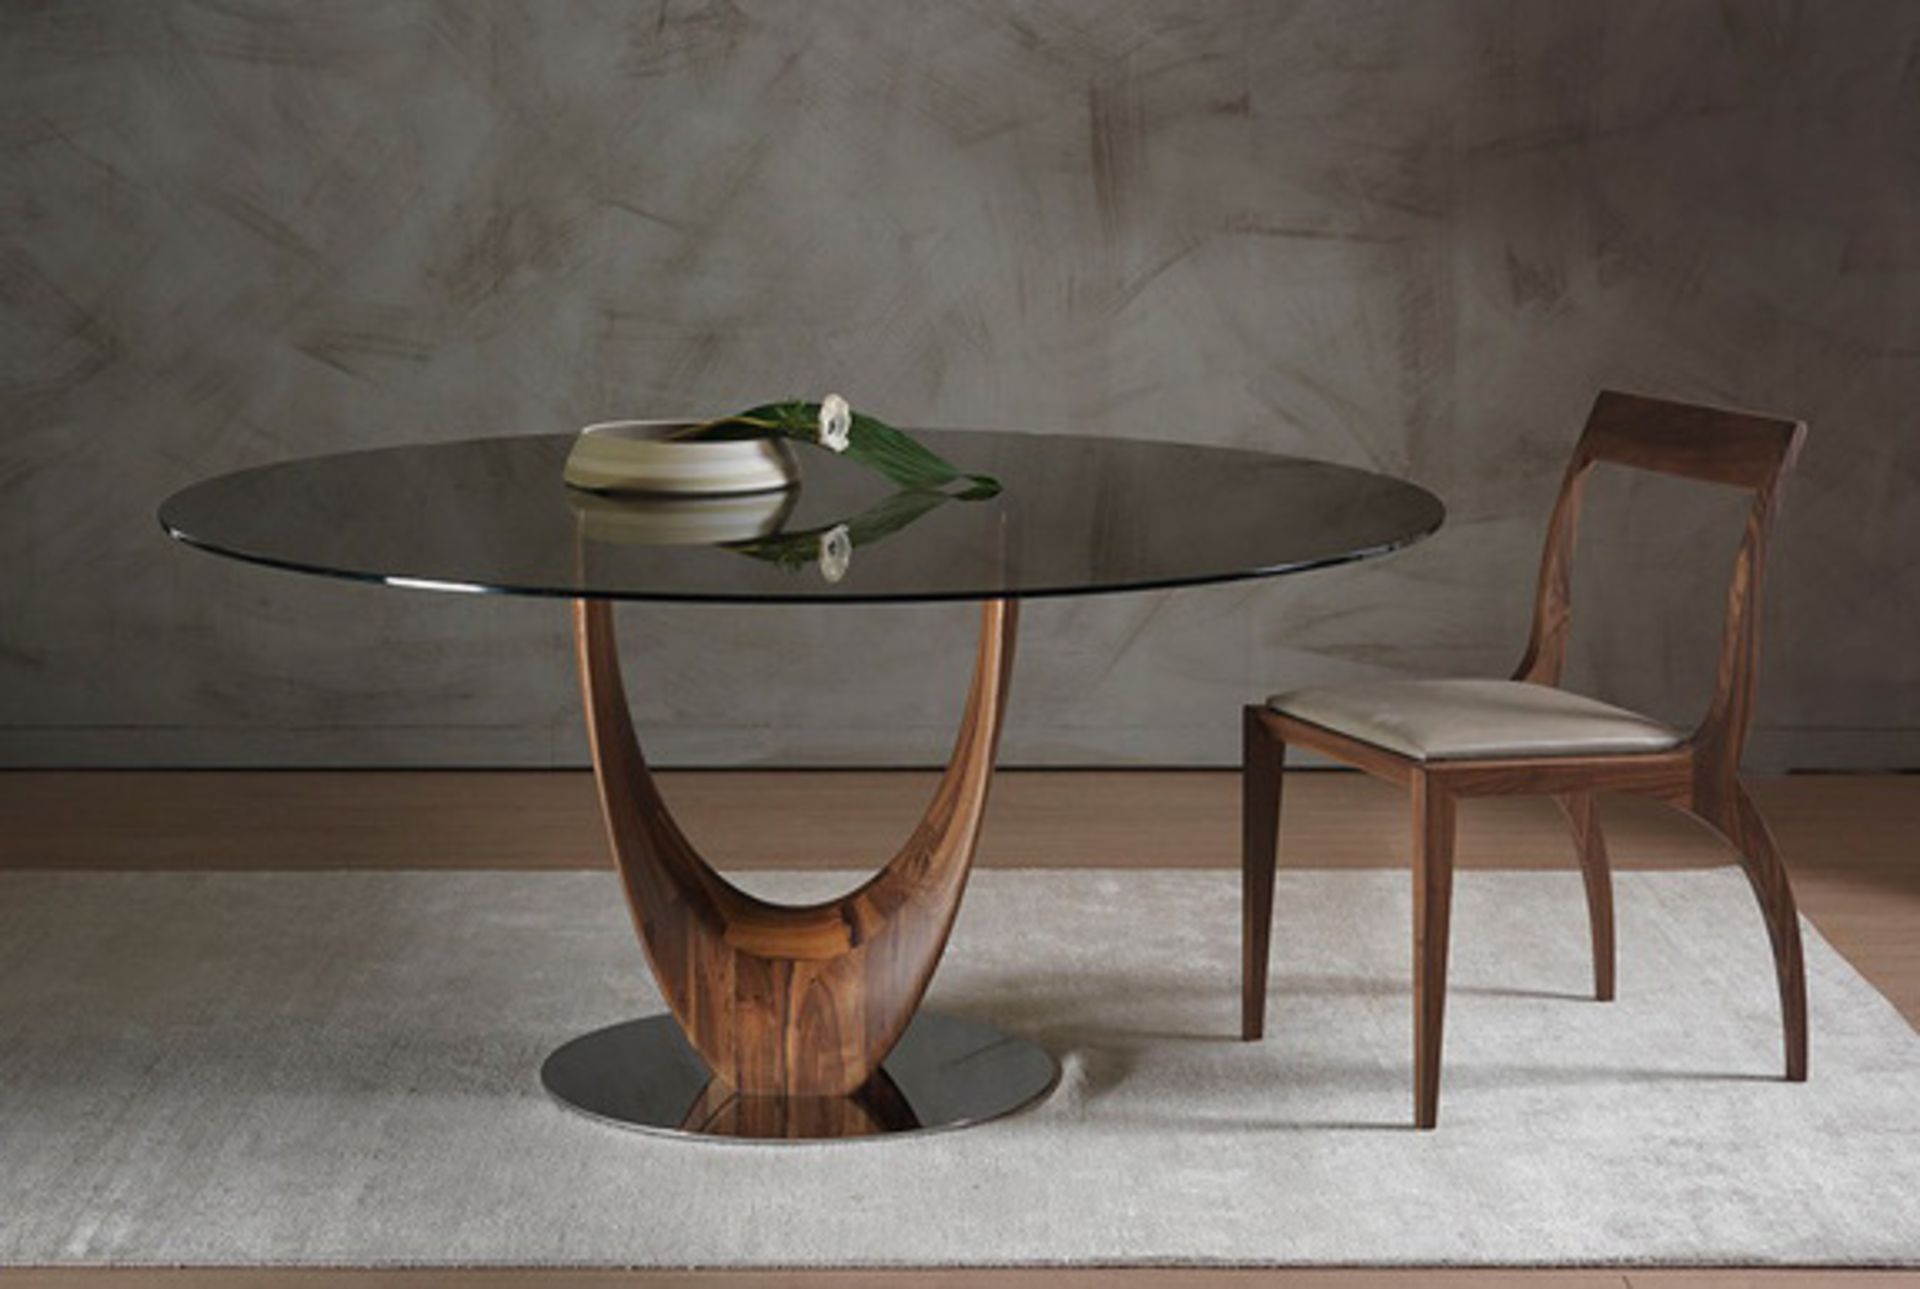 Pacini & Cappellini Table Axis Full Wood - Image 2 of 6